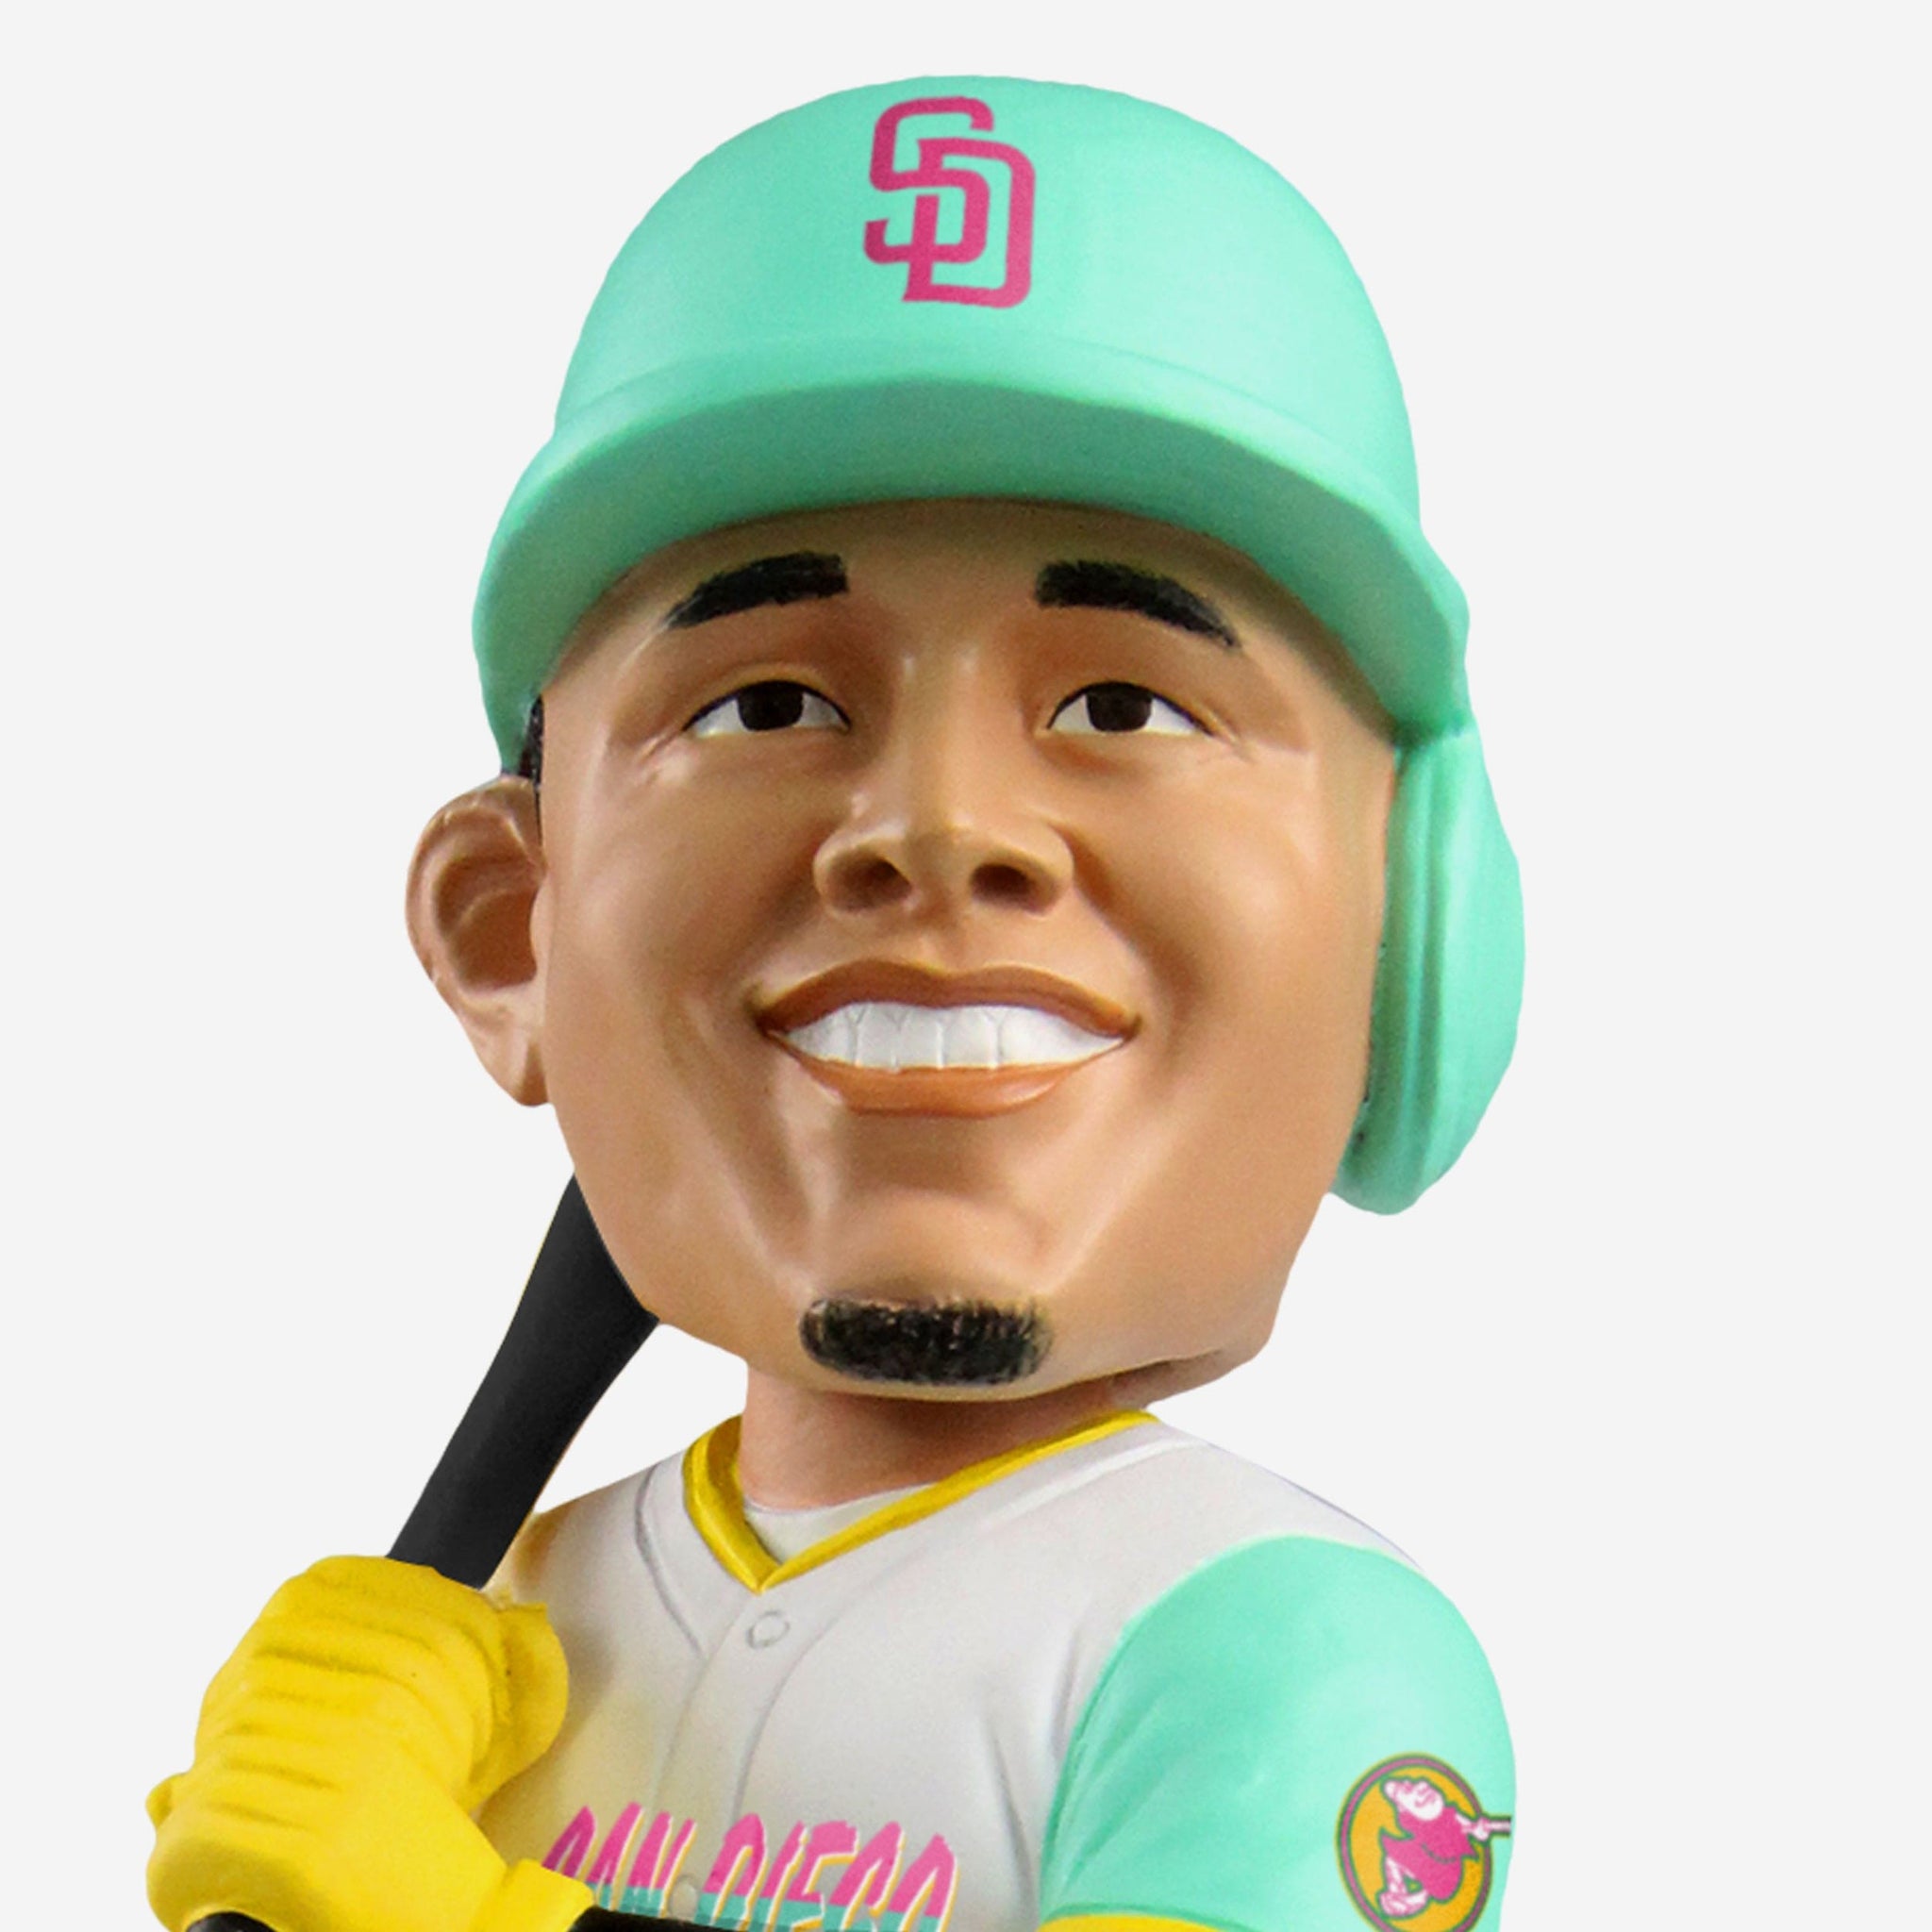 Number 13 san diego padres manny machado white 2022 city connect